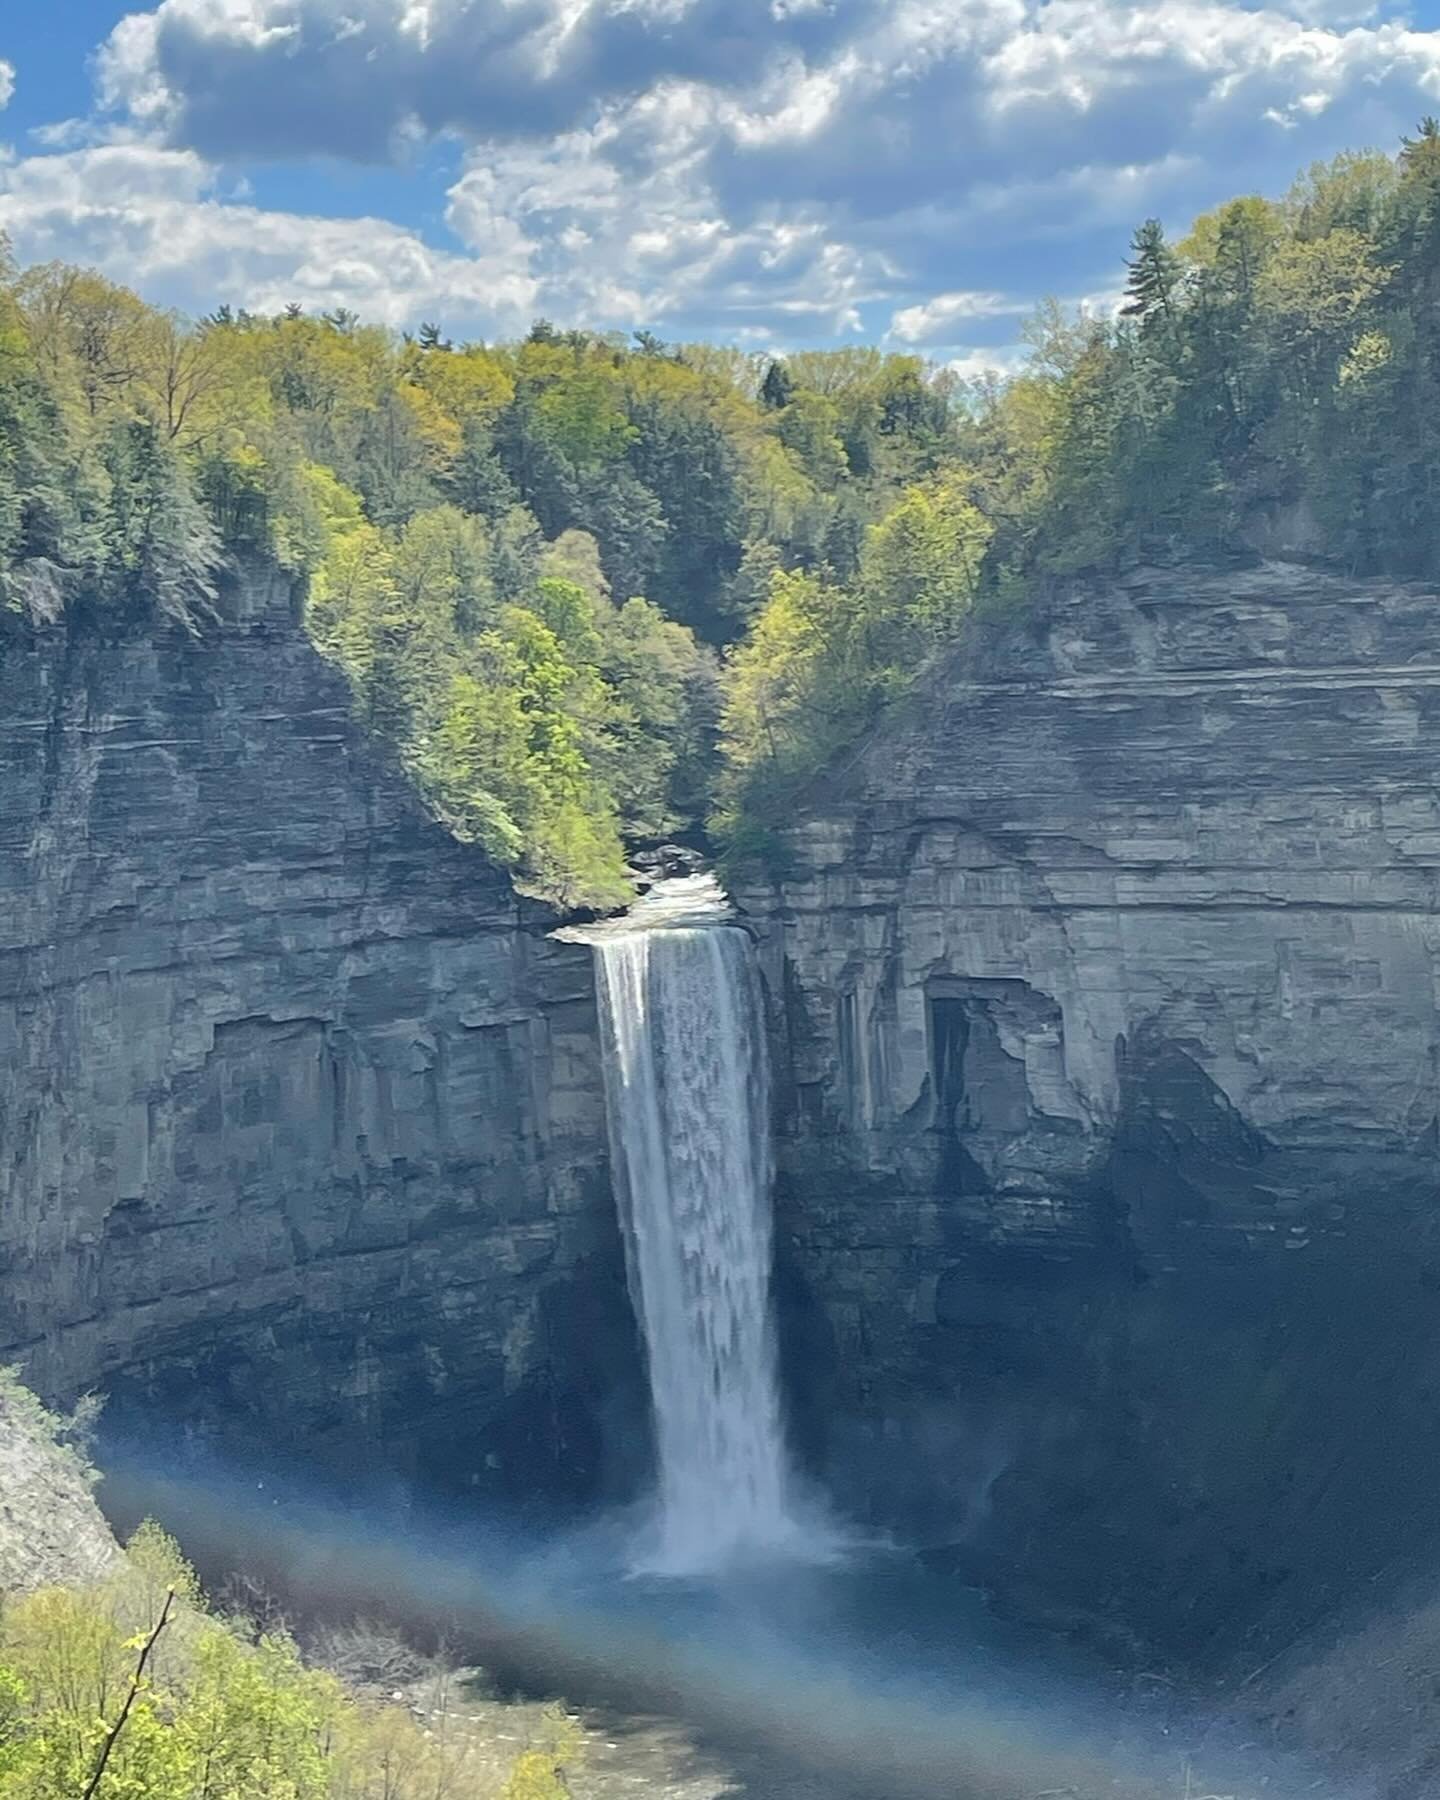 Happy Earth Day! 🌎 

[Photo taken at Taughannock Falls in Ithaca, NY]

&ldquo;Never doubt that a small group of thoughtful, committed citizens can change the world. Indeed, it&rsquo;s the only thing that ever has.&rdquo; 
-Margaret Mead